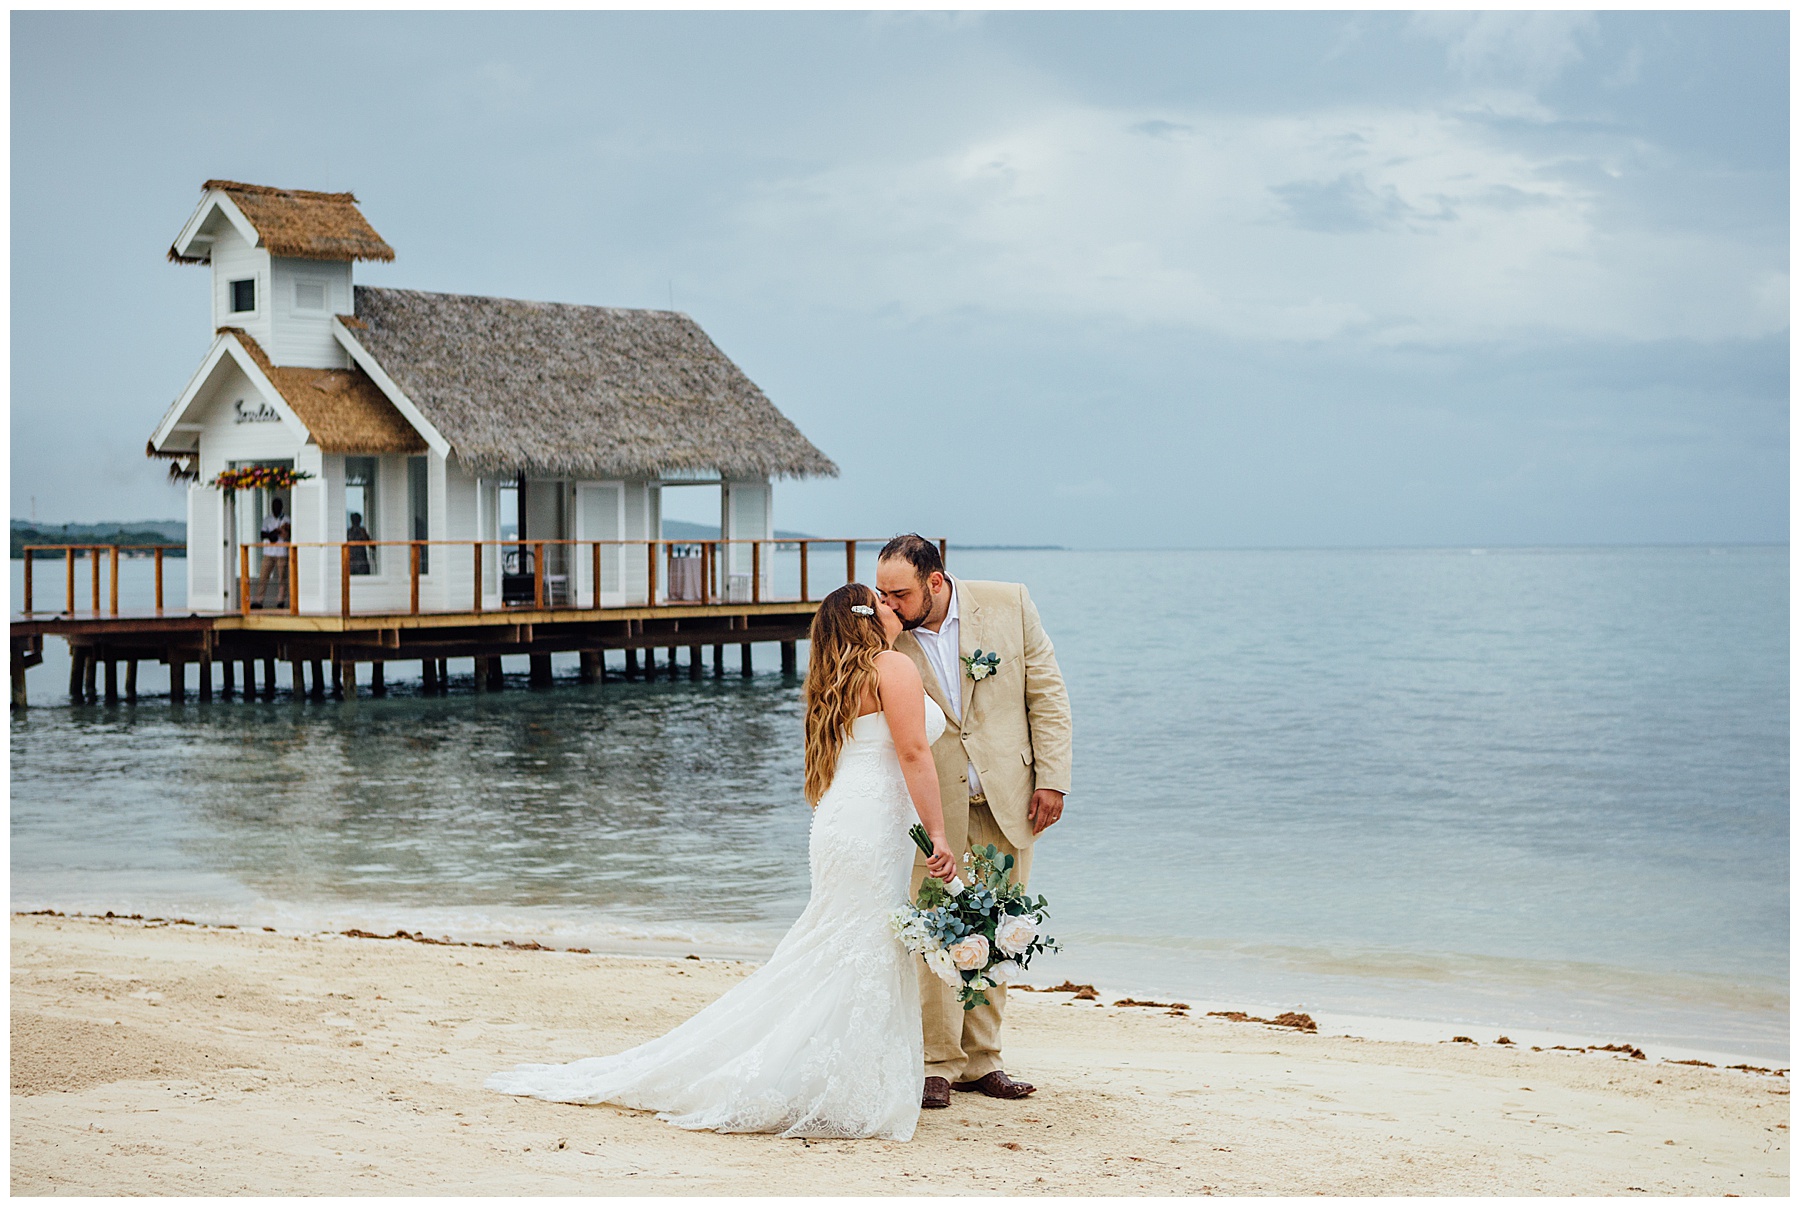 Bride and Groom kissing on beach in Jamaica